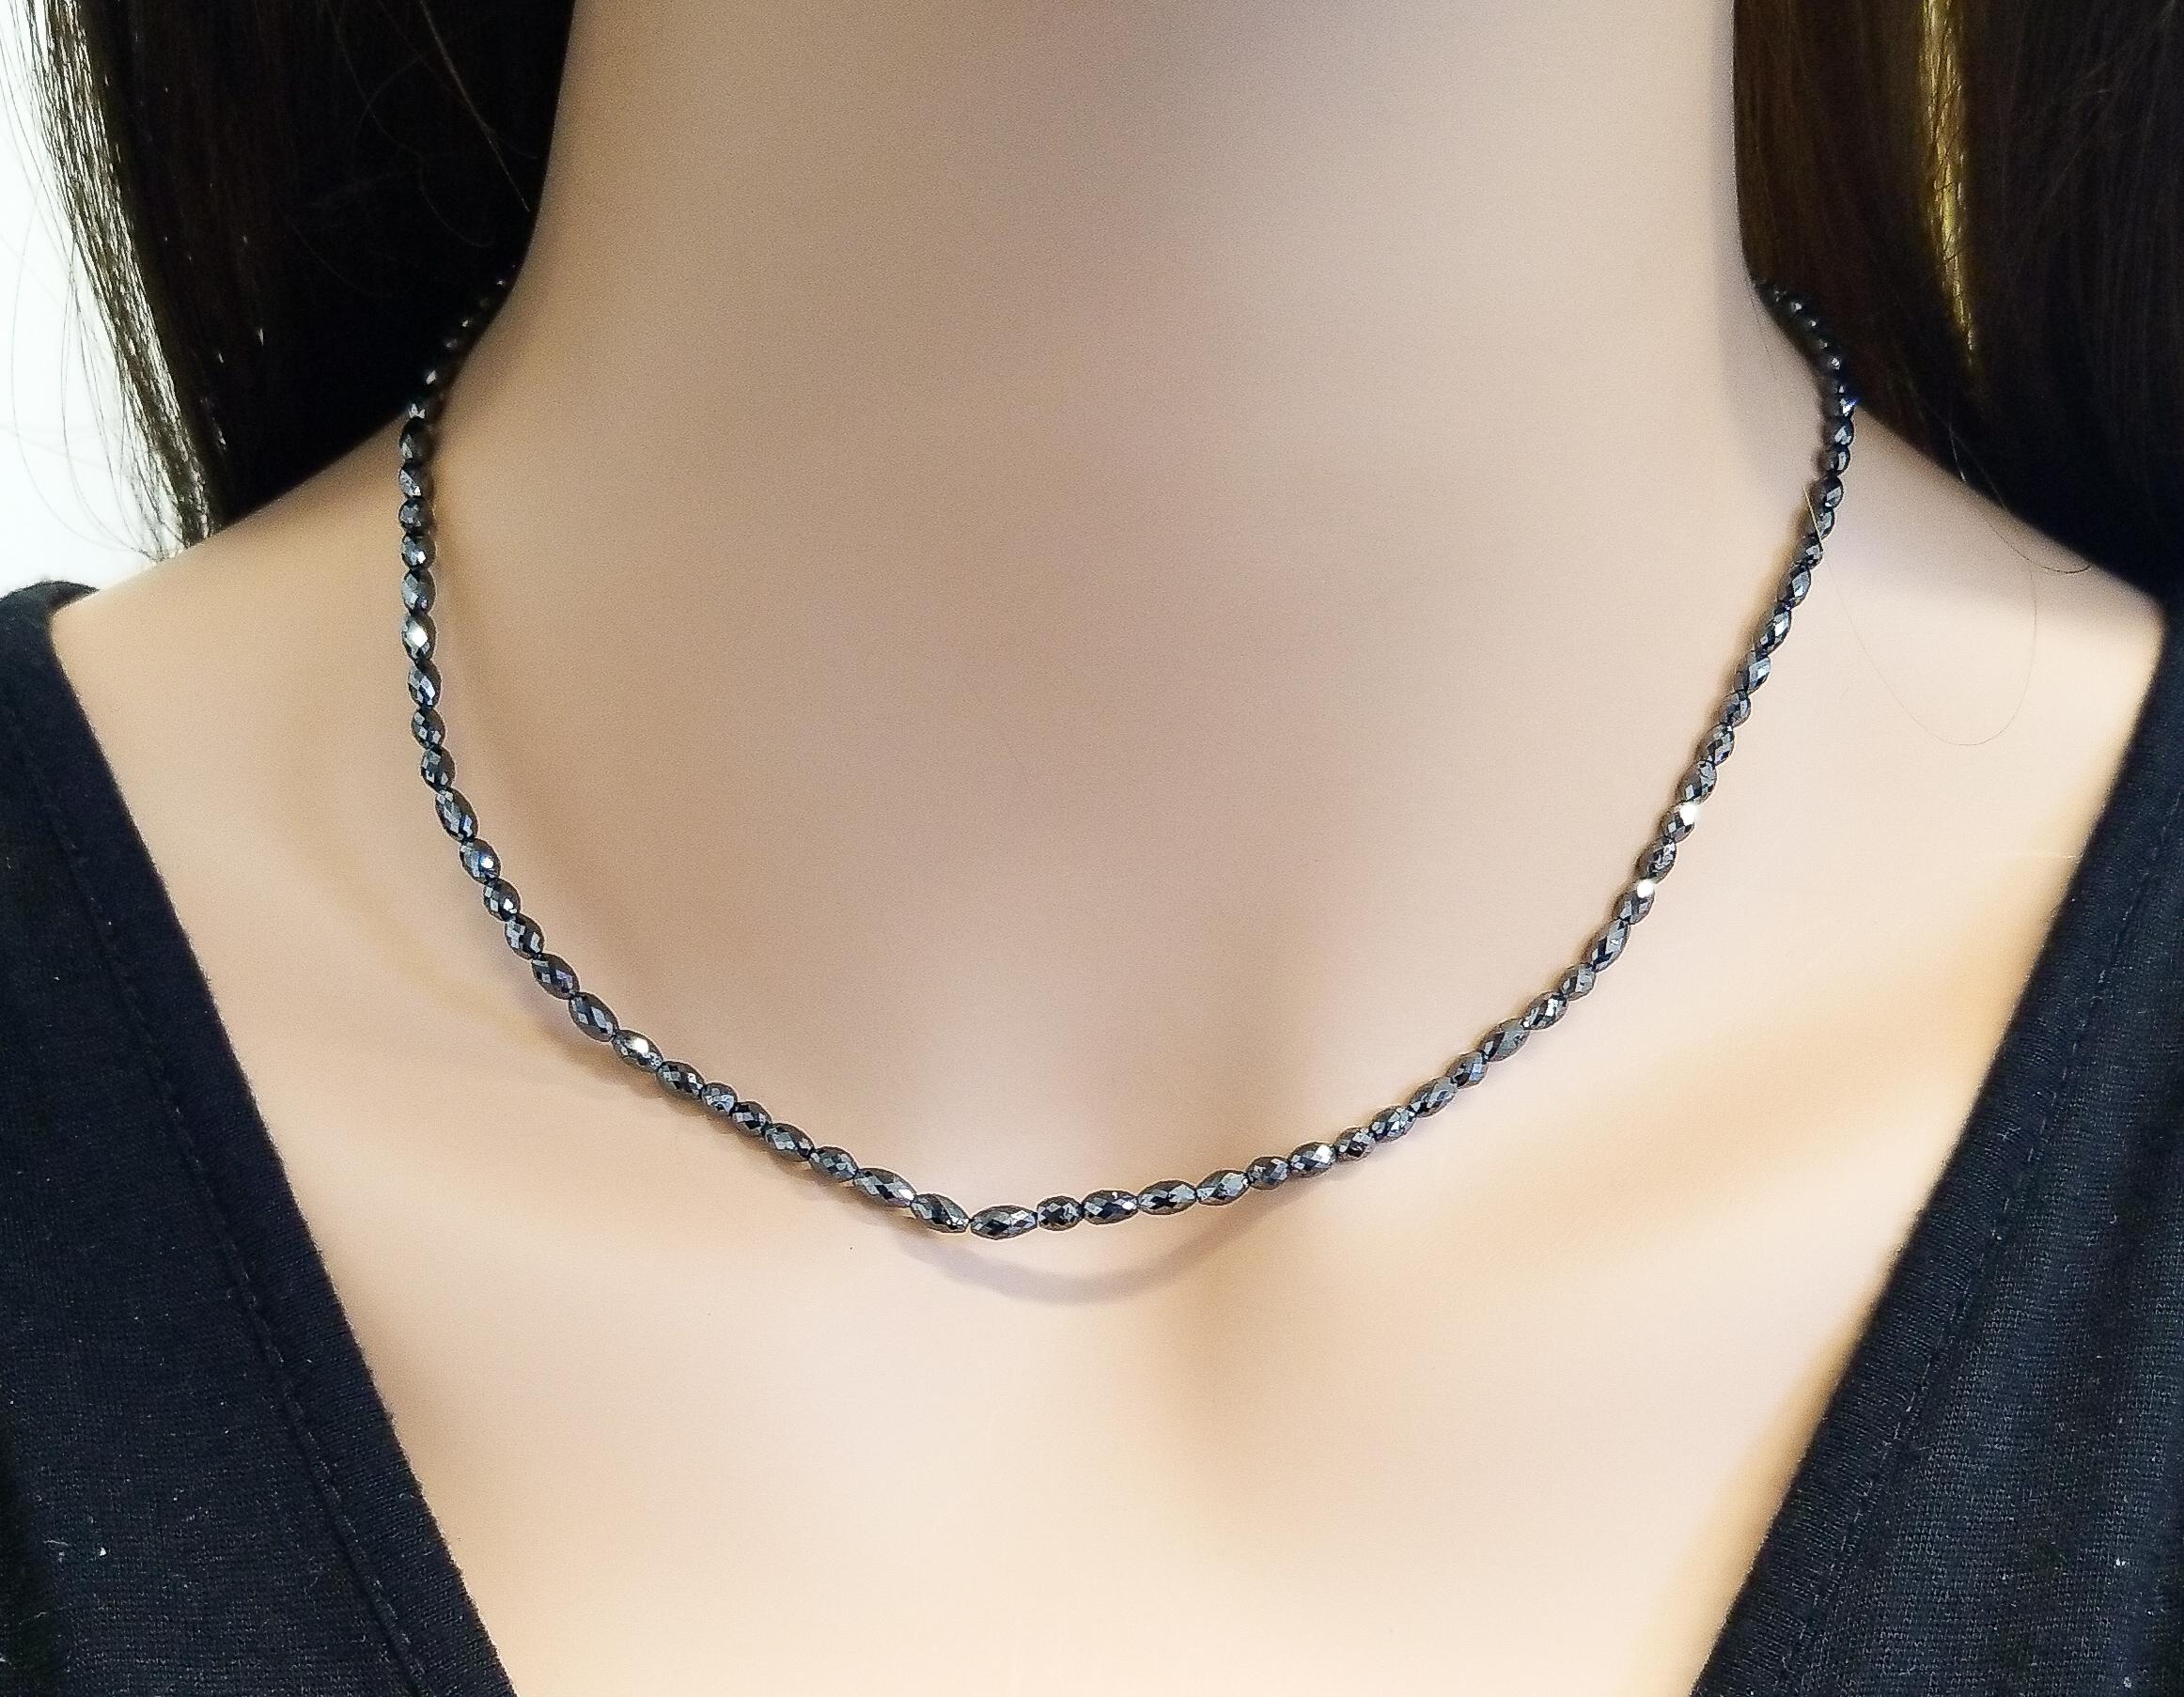 Contemporary 31.00 Carat Total Natural Faceted Black Diamond Necklace in 14 Karat White Gold